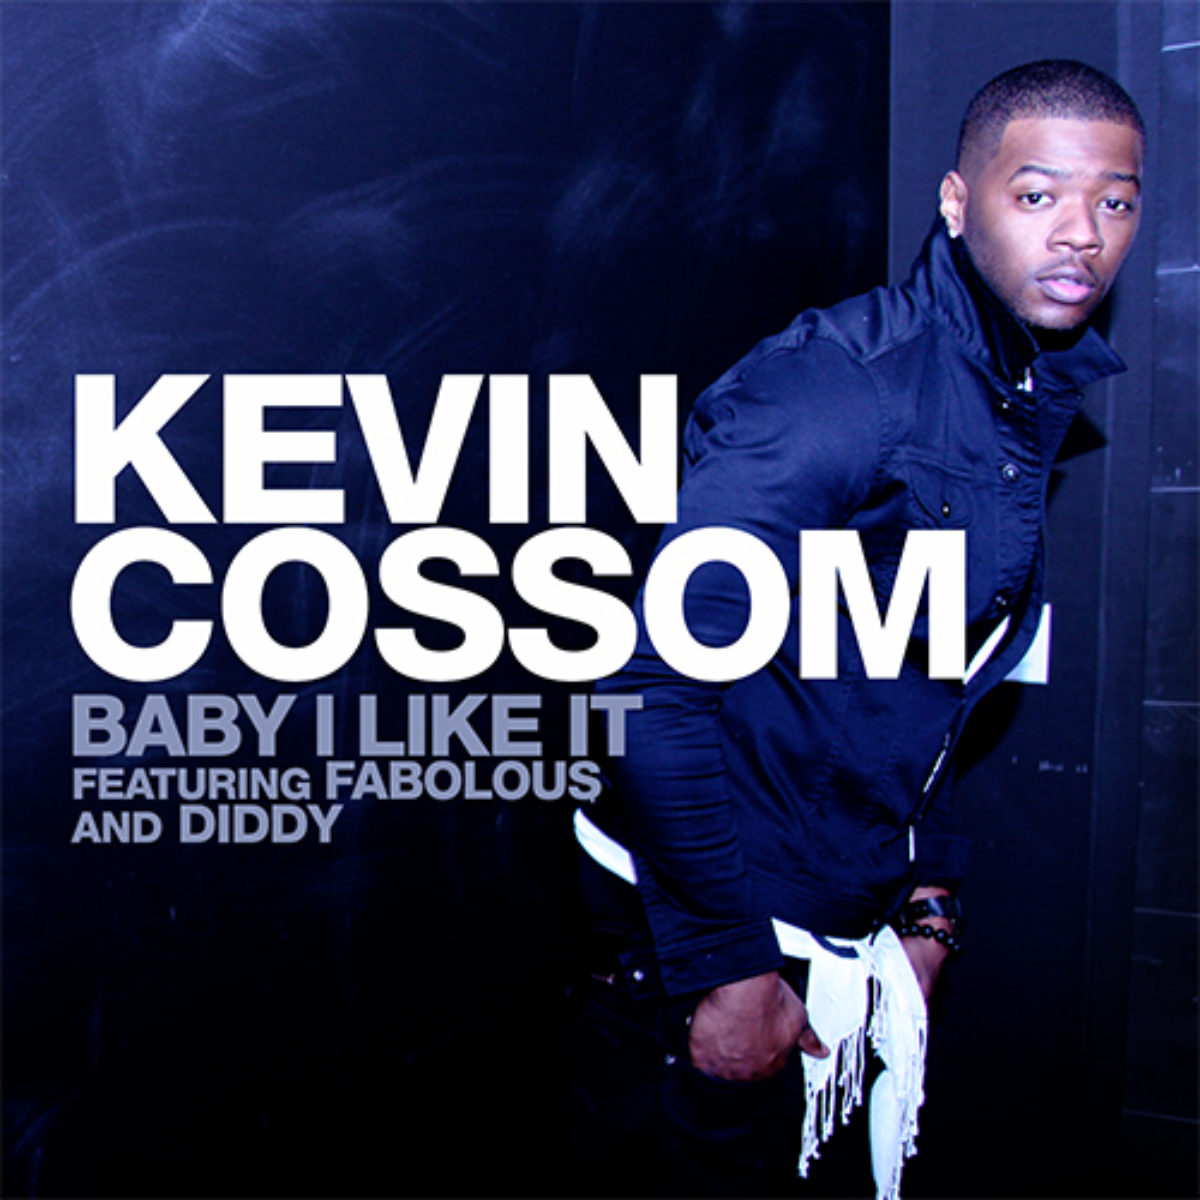 Baby i like me. Kevin Cossom. Diddy Baby. Baby i like it песня. Baby and me.